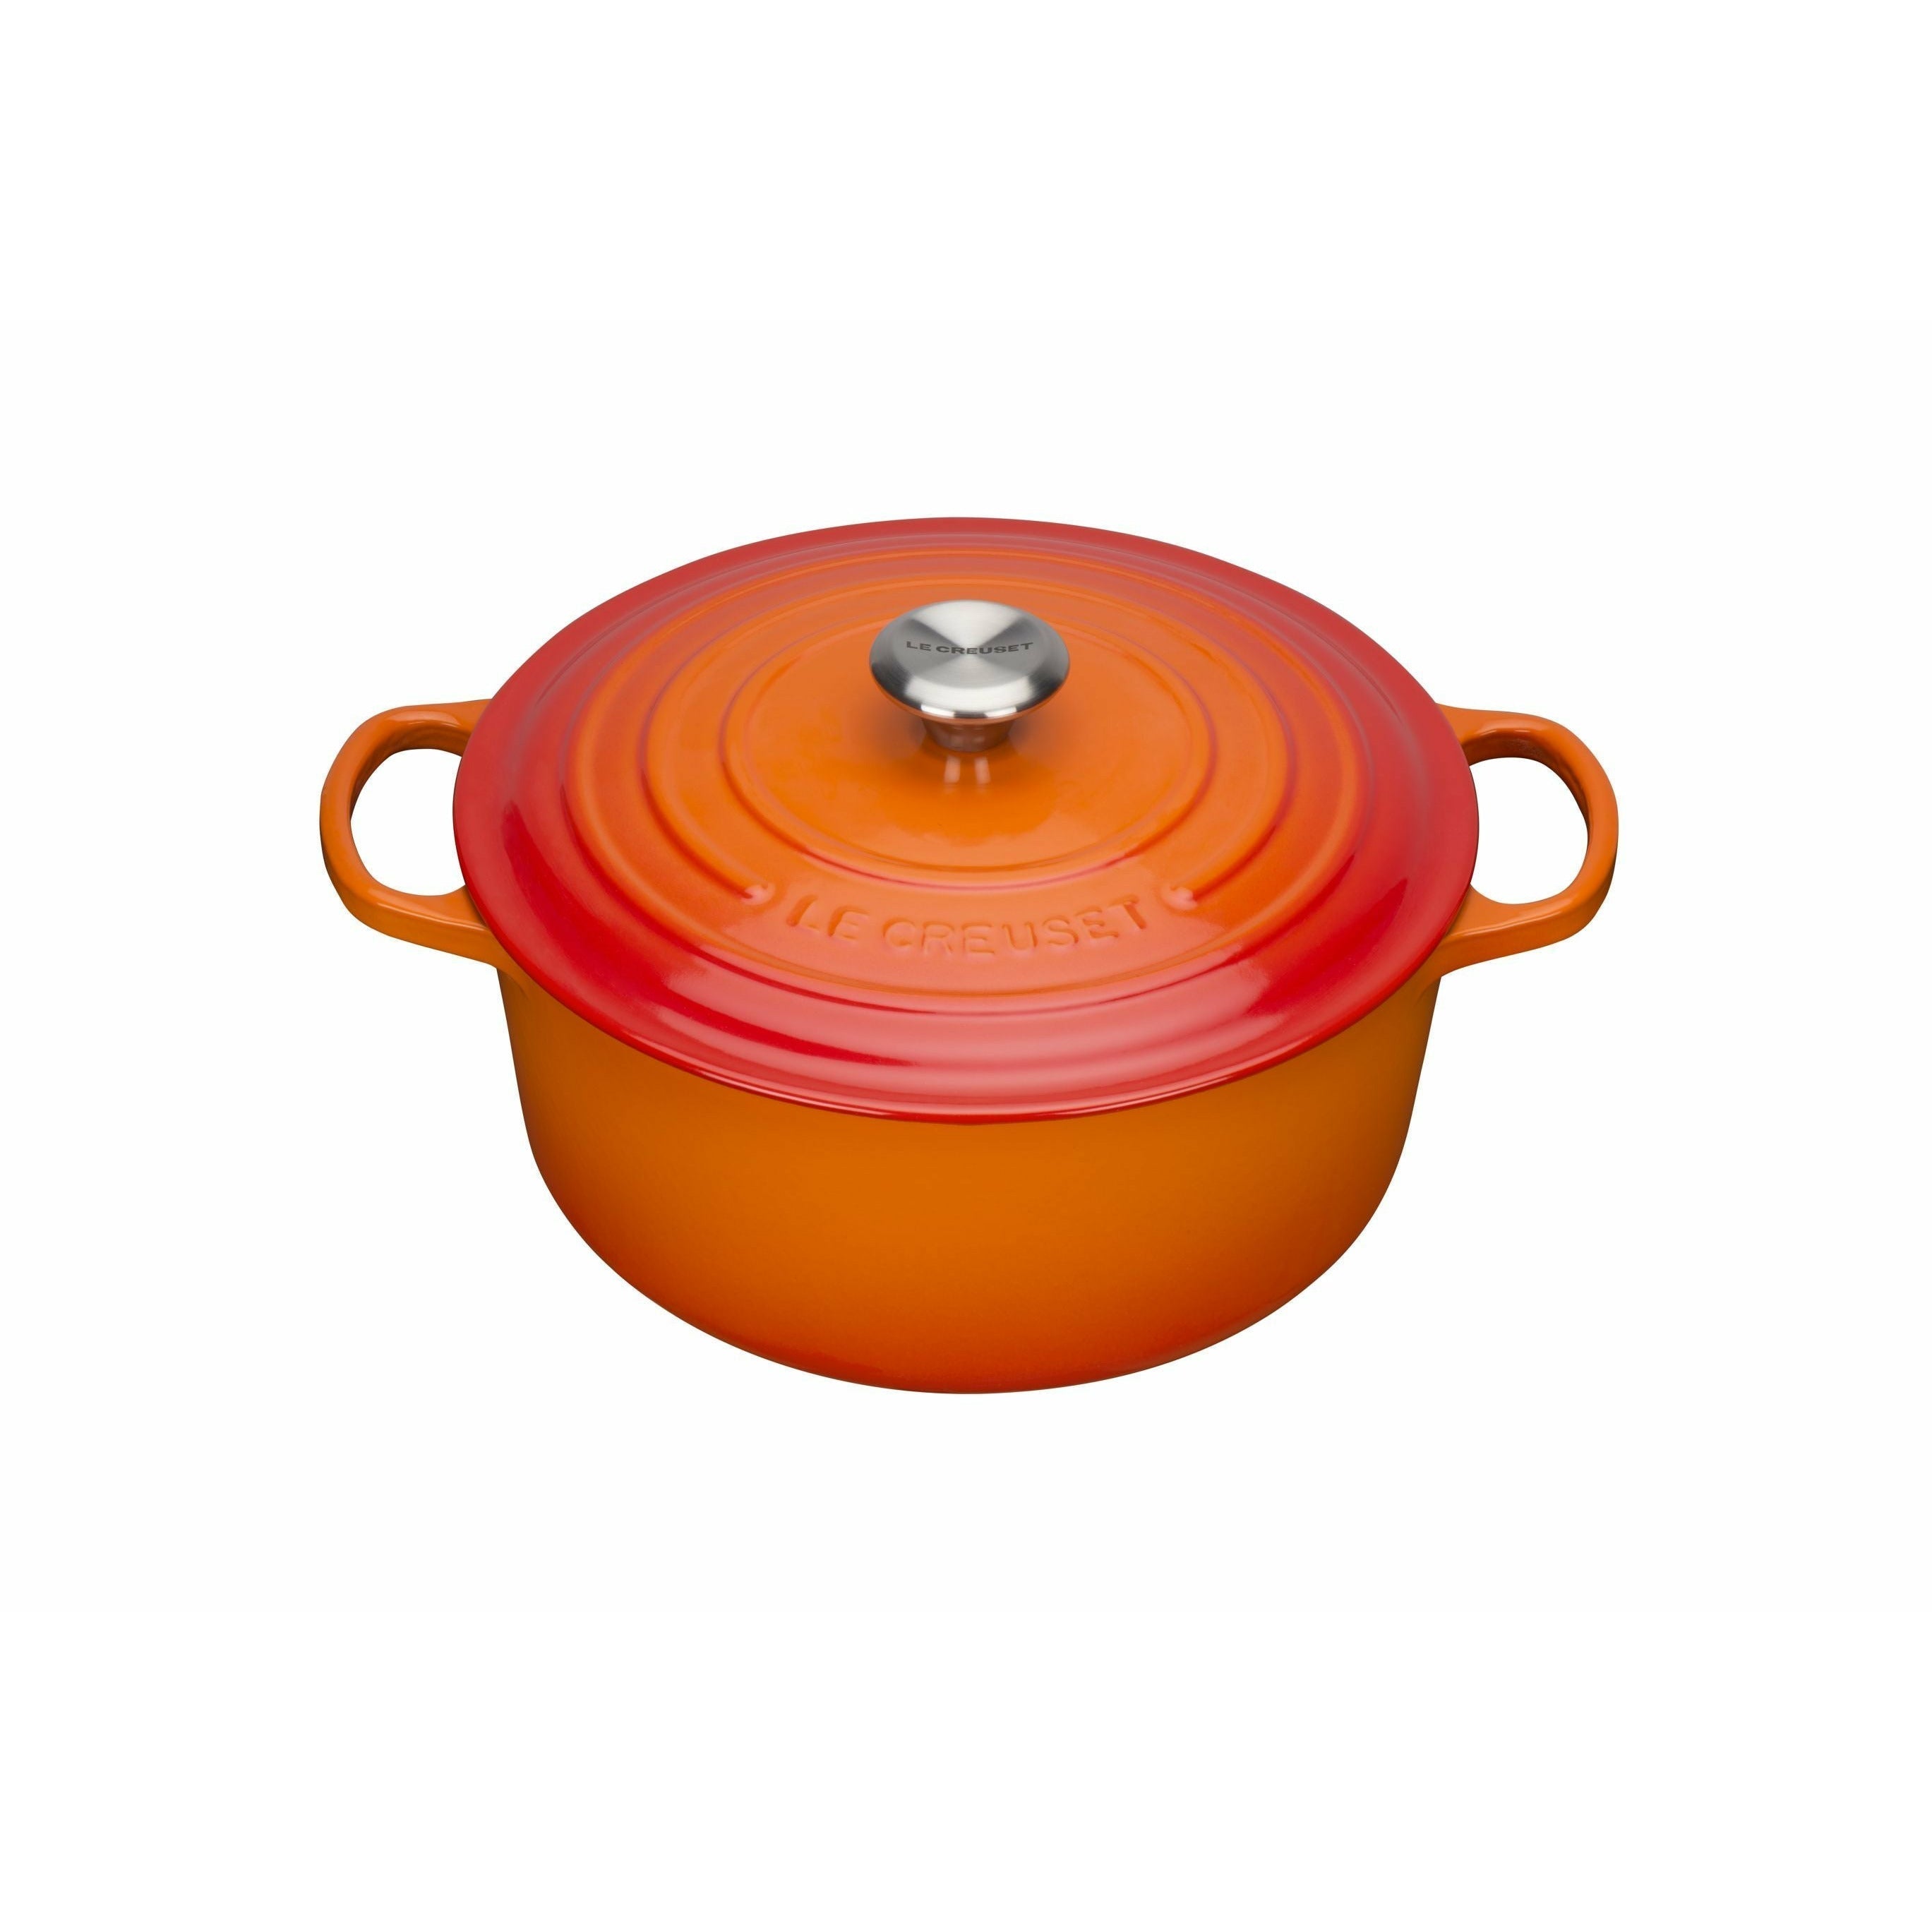 Le Creuset Signature Round Roaster 24 Cm, Oven Red